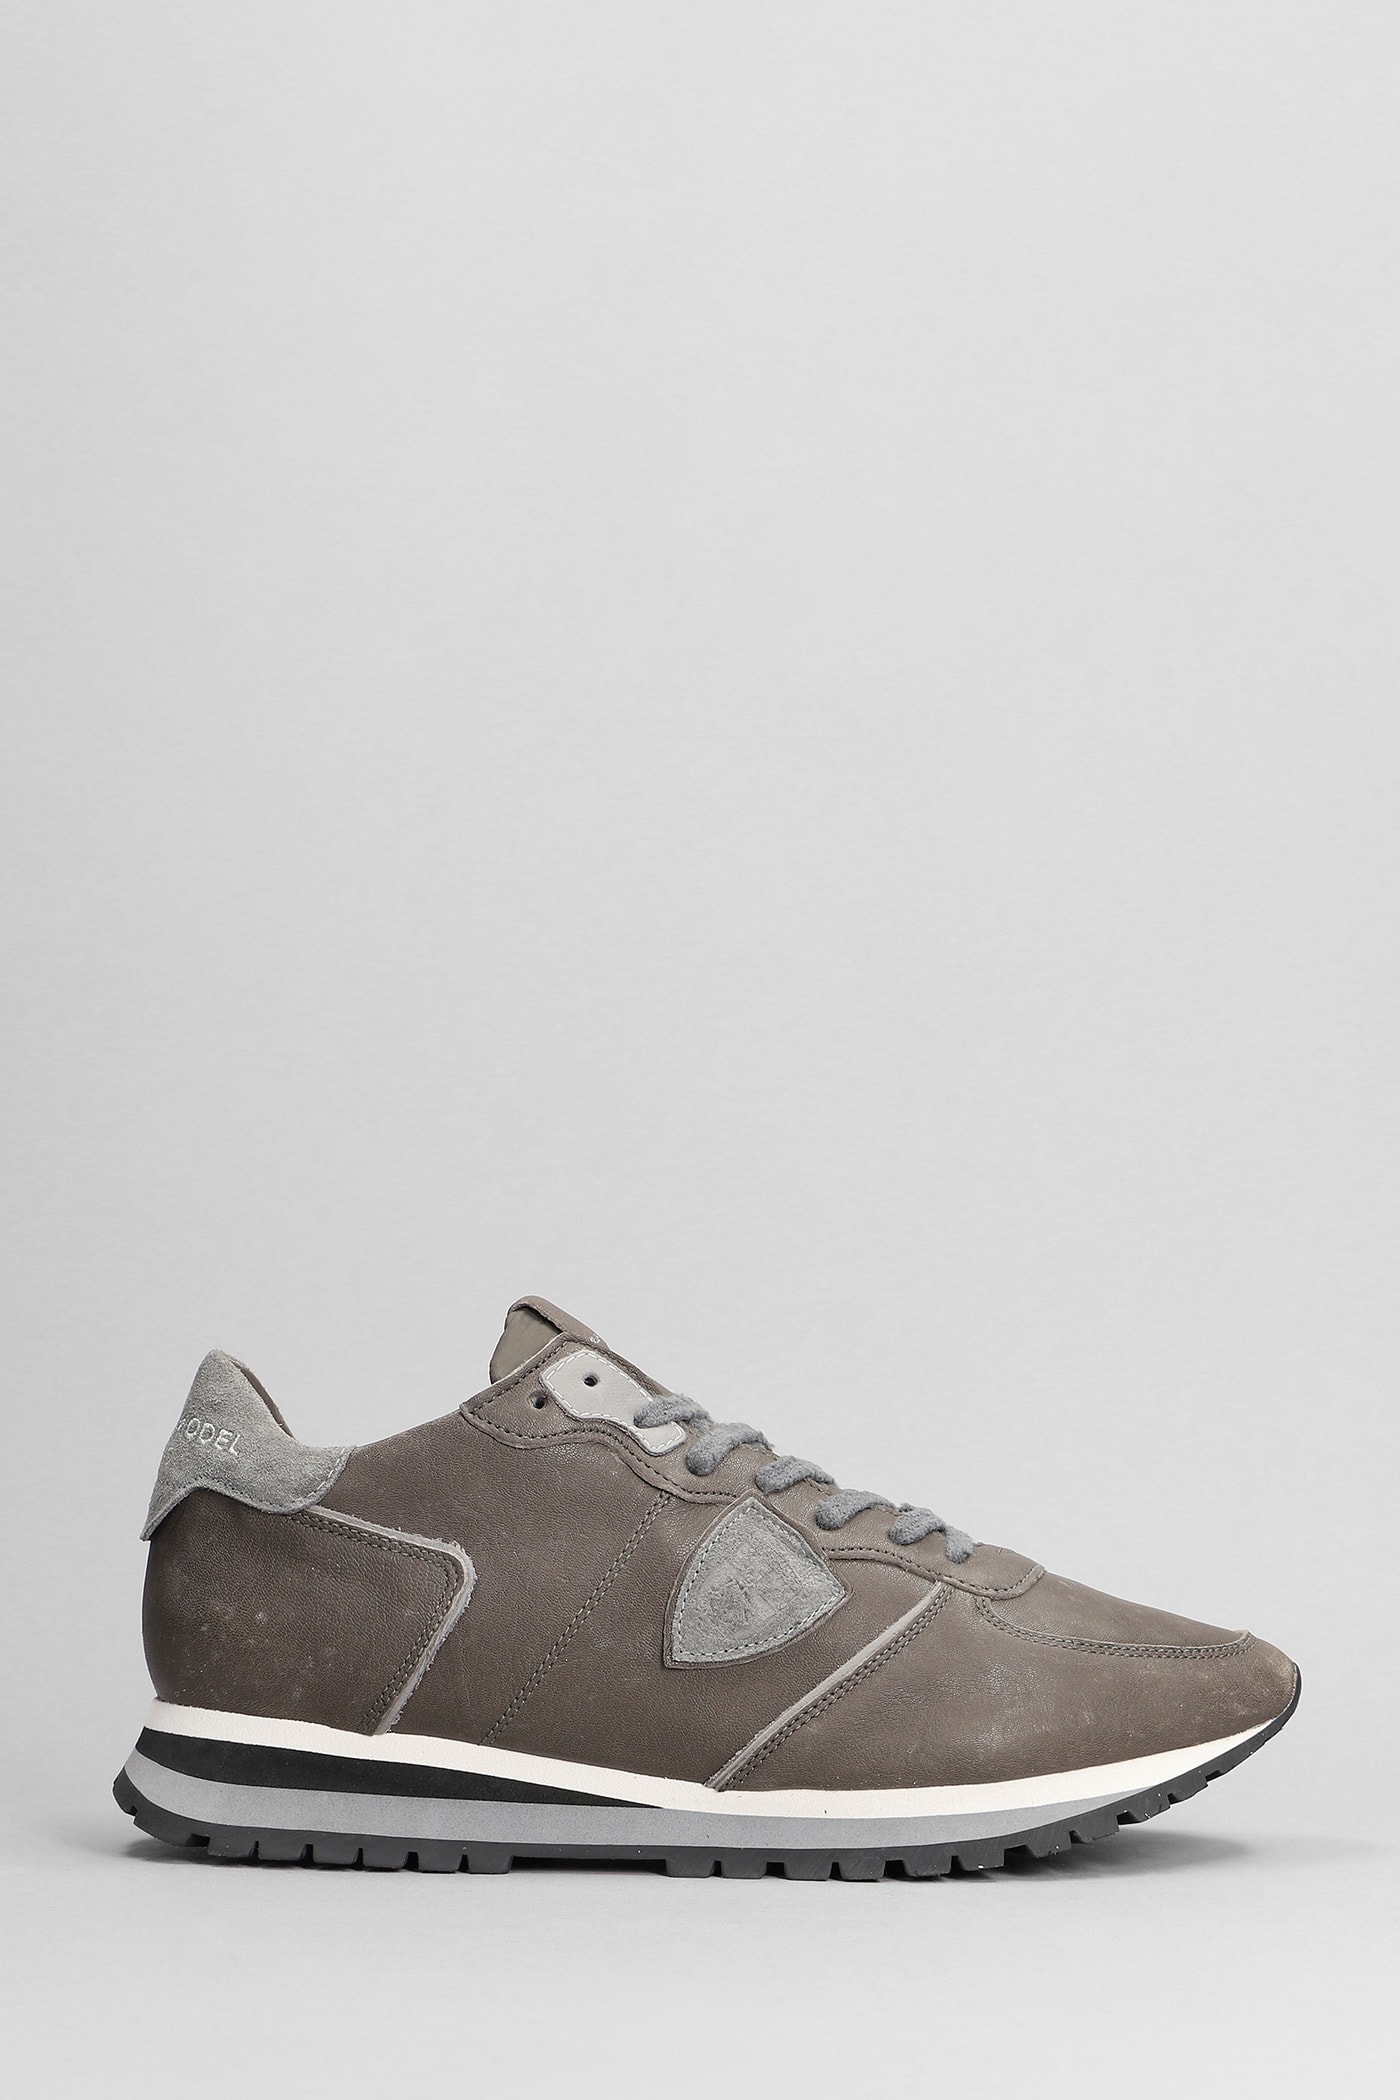 Philippe Model Trpx Sneakers In Grey Leather